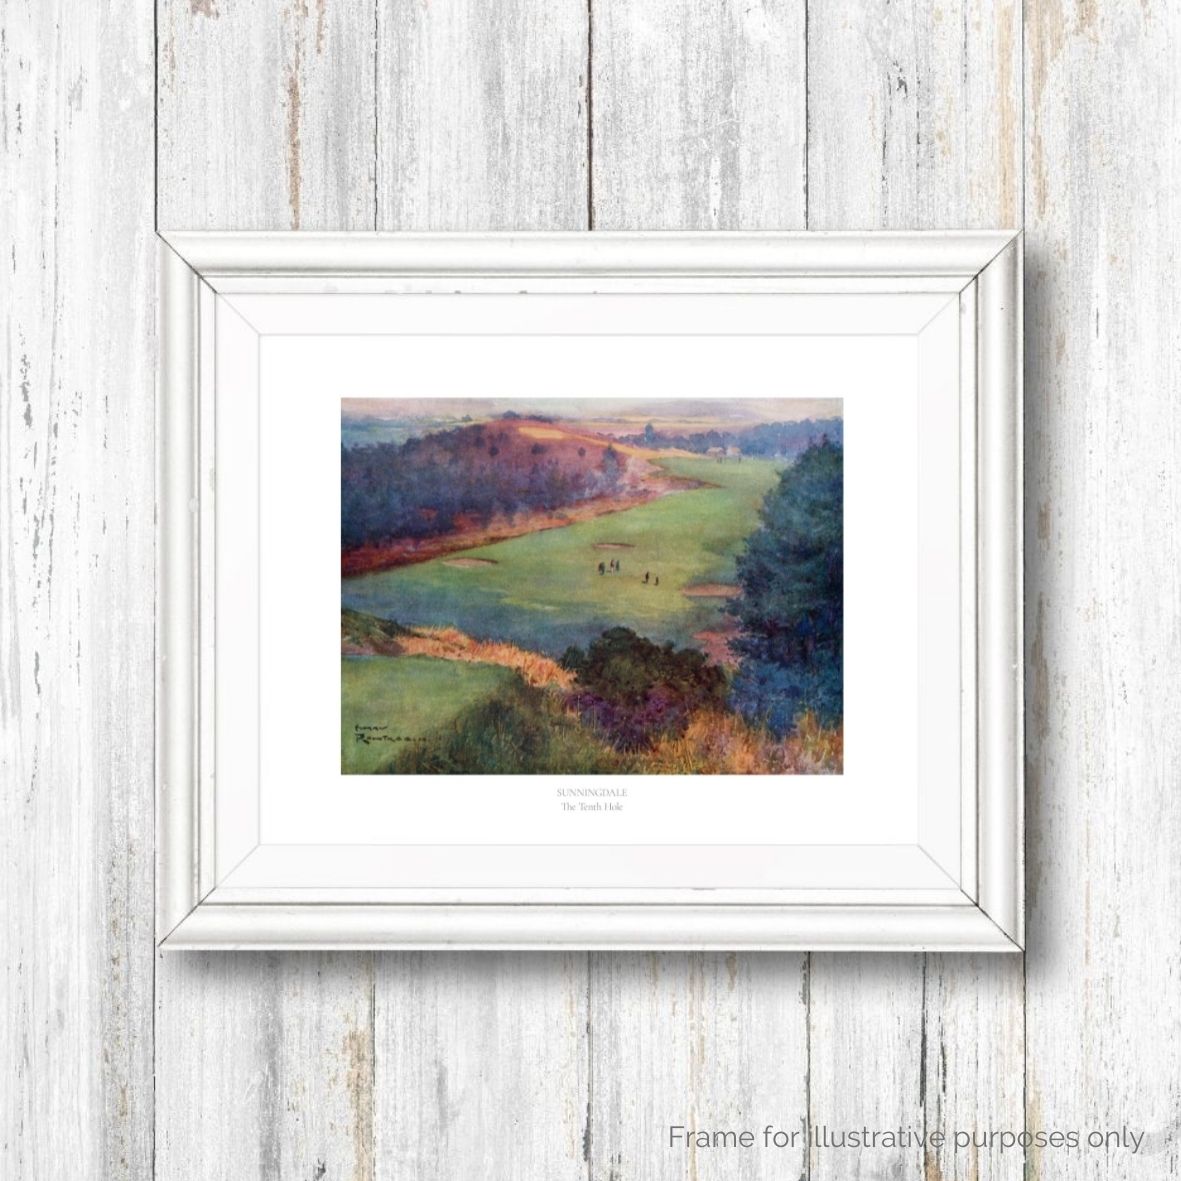 Sunningdale framed print by Harry Rountree